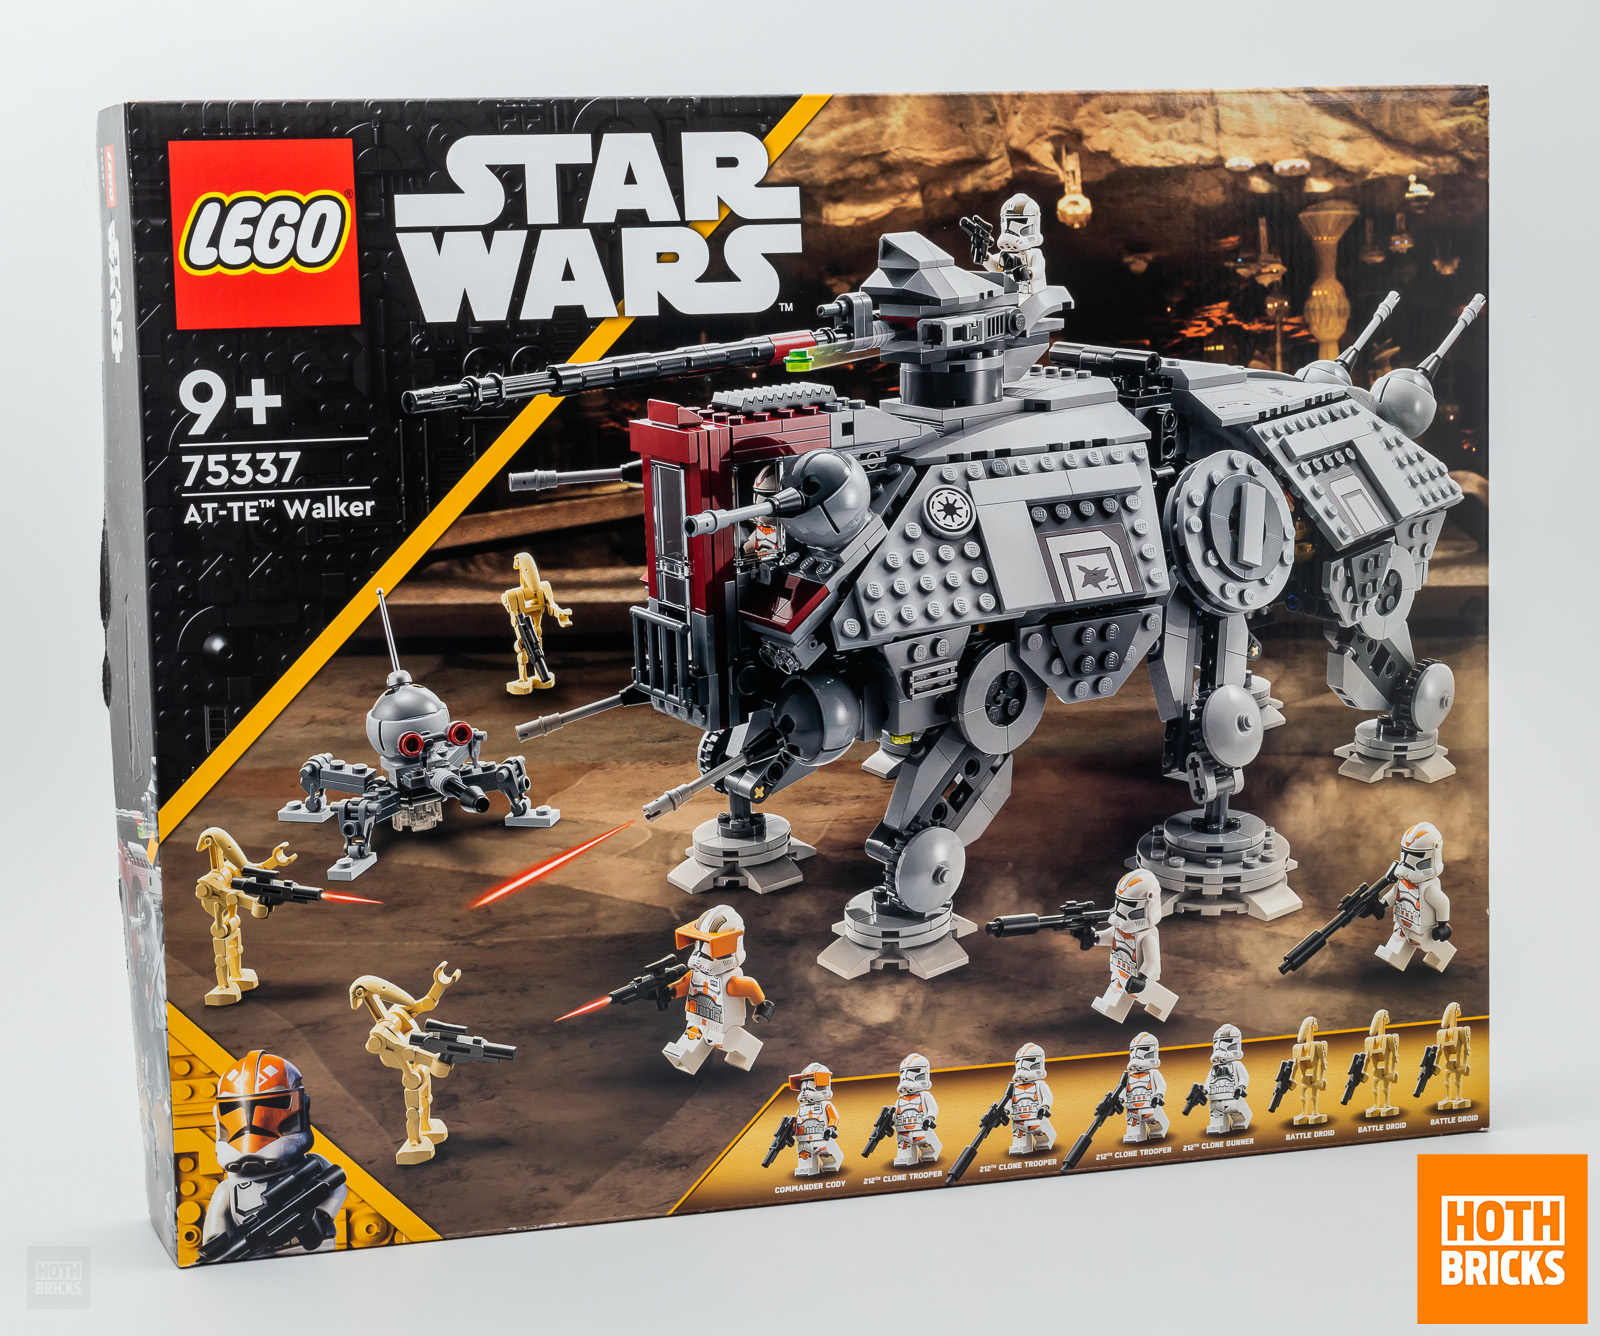 Contest: a copy of the LEGO Star Wars 75337 AT-TE Walker set to be won!